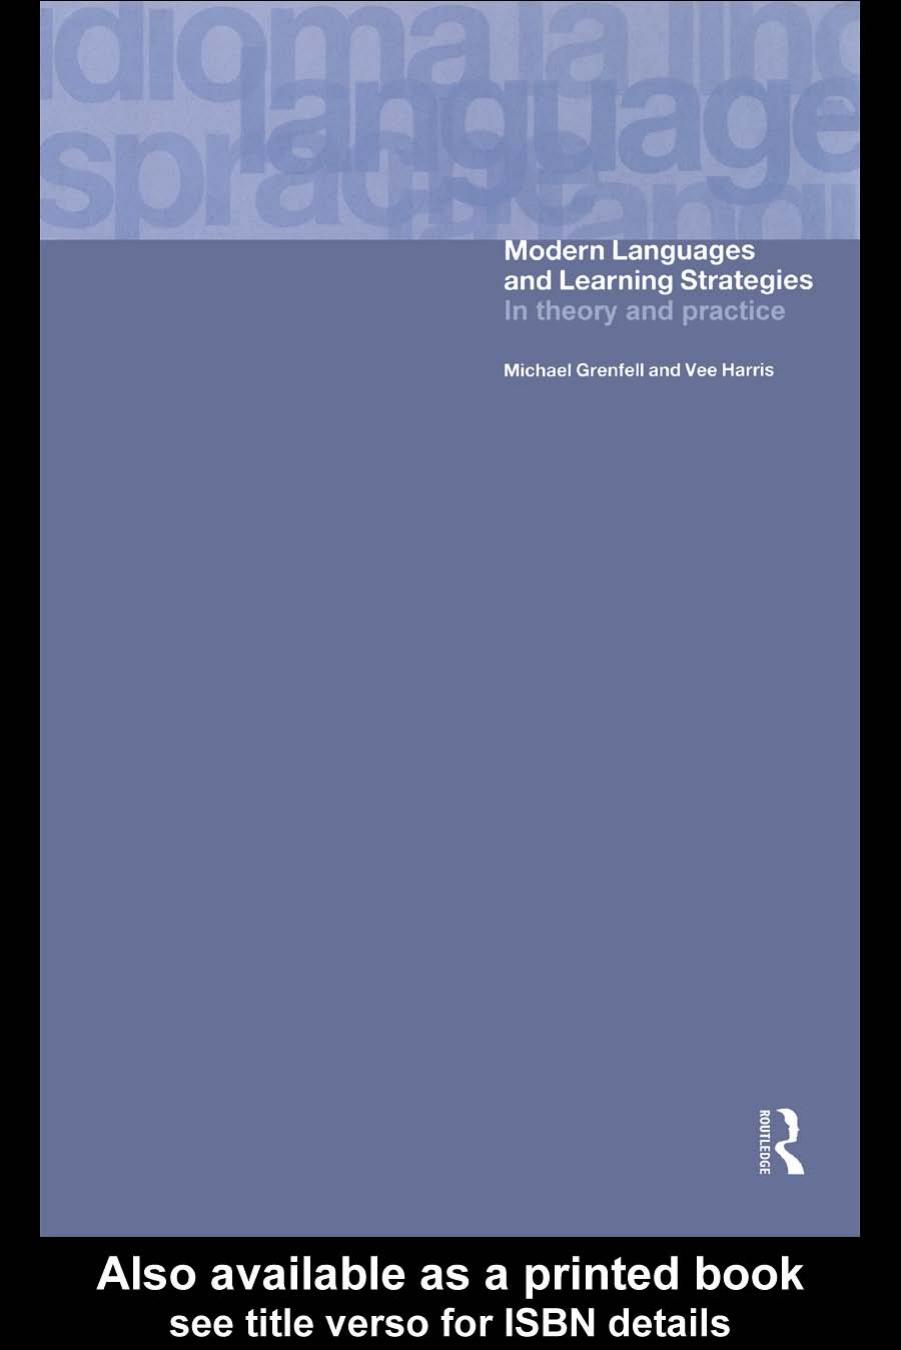 Modern Languages and Learning Strategies: In theory and practice